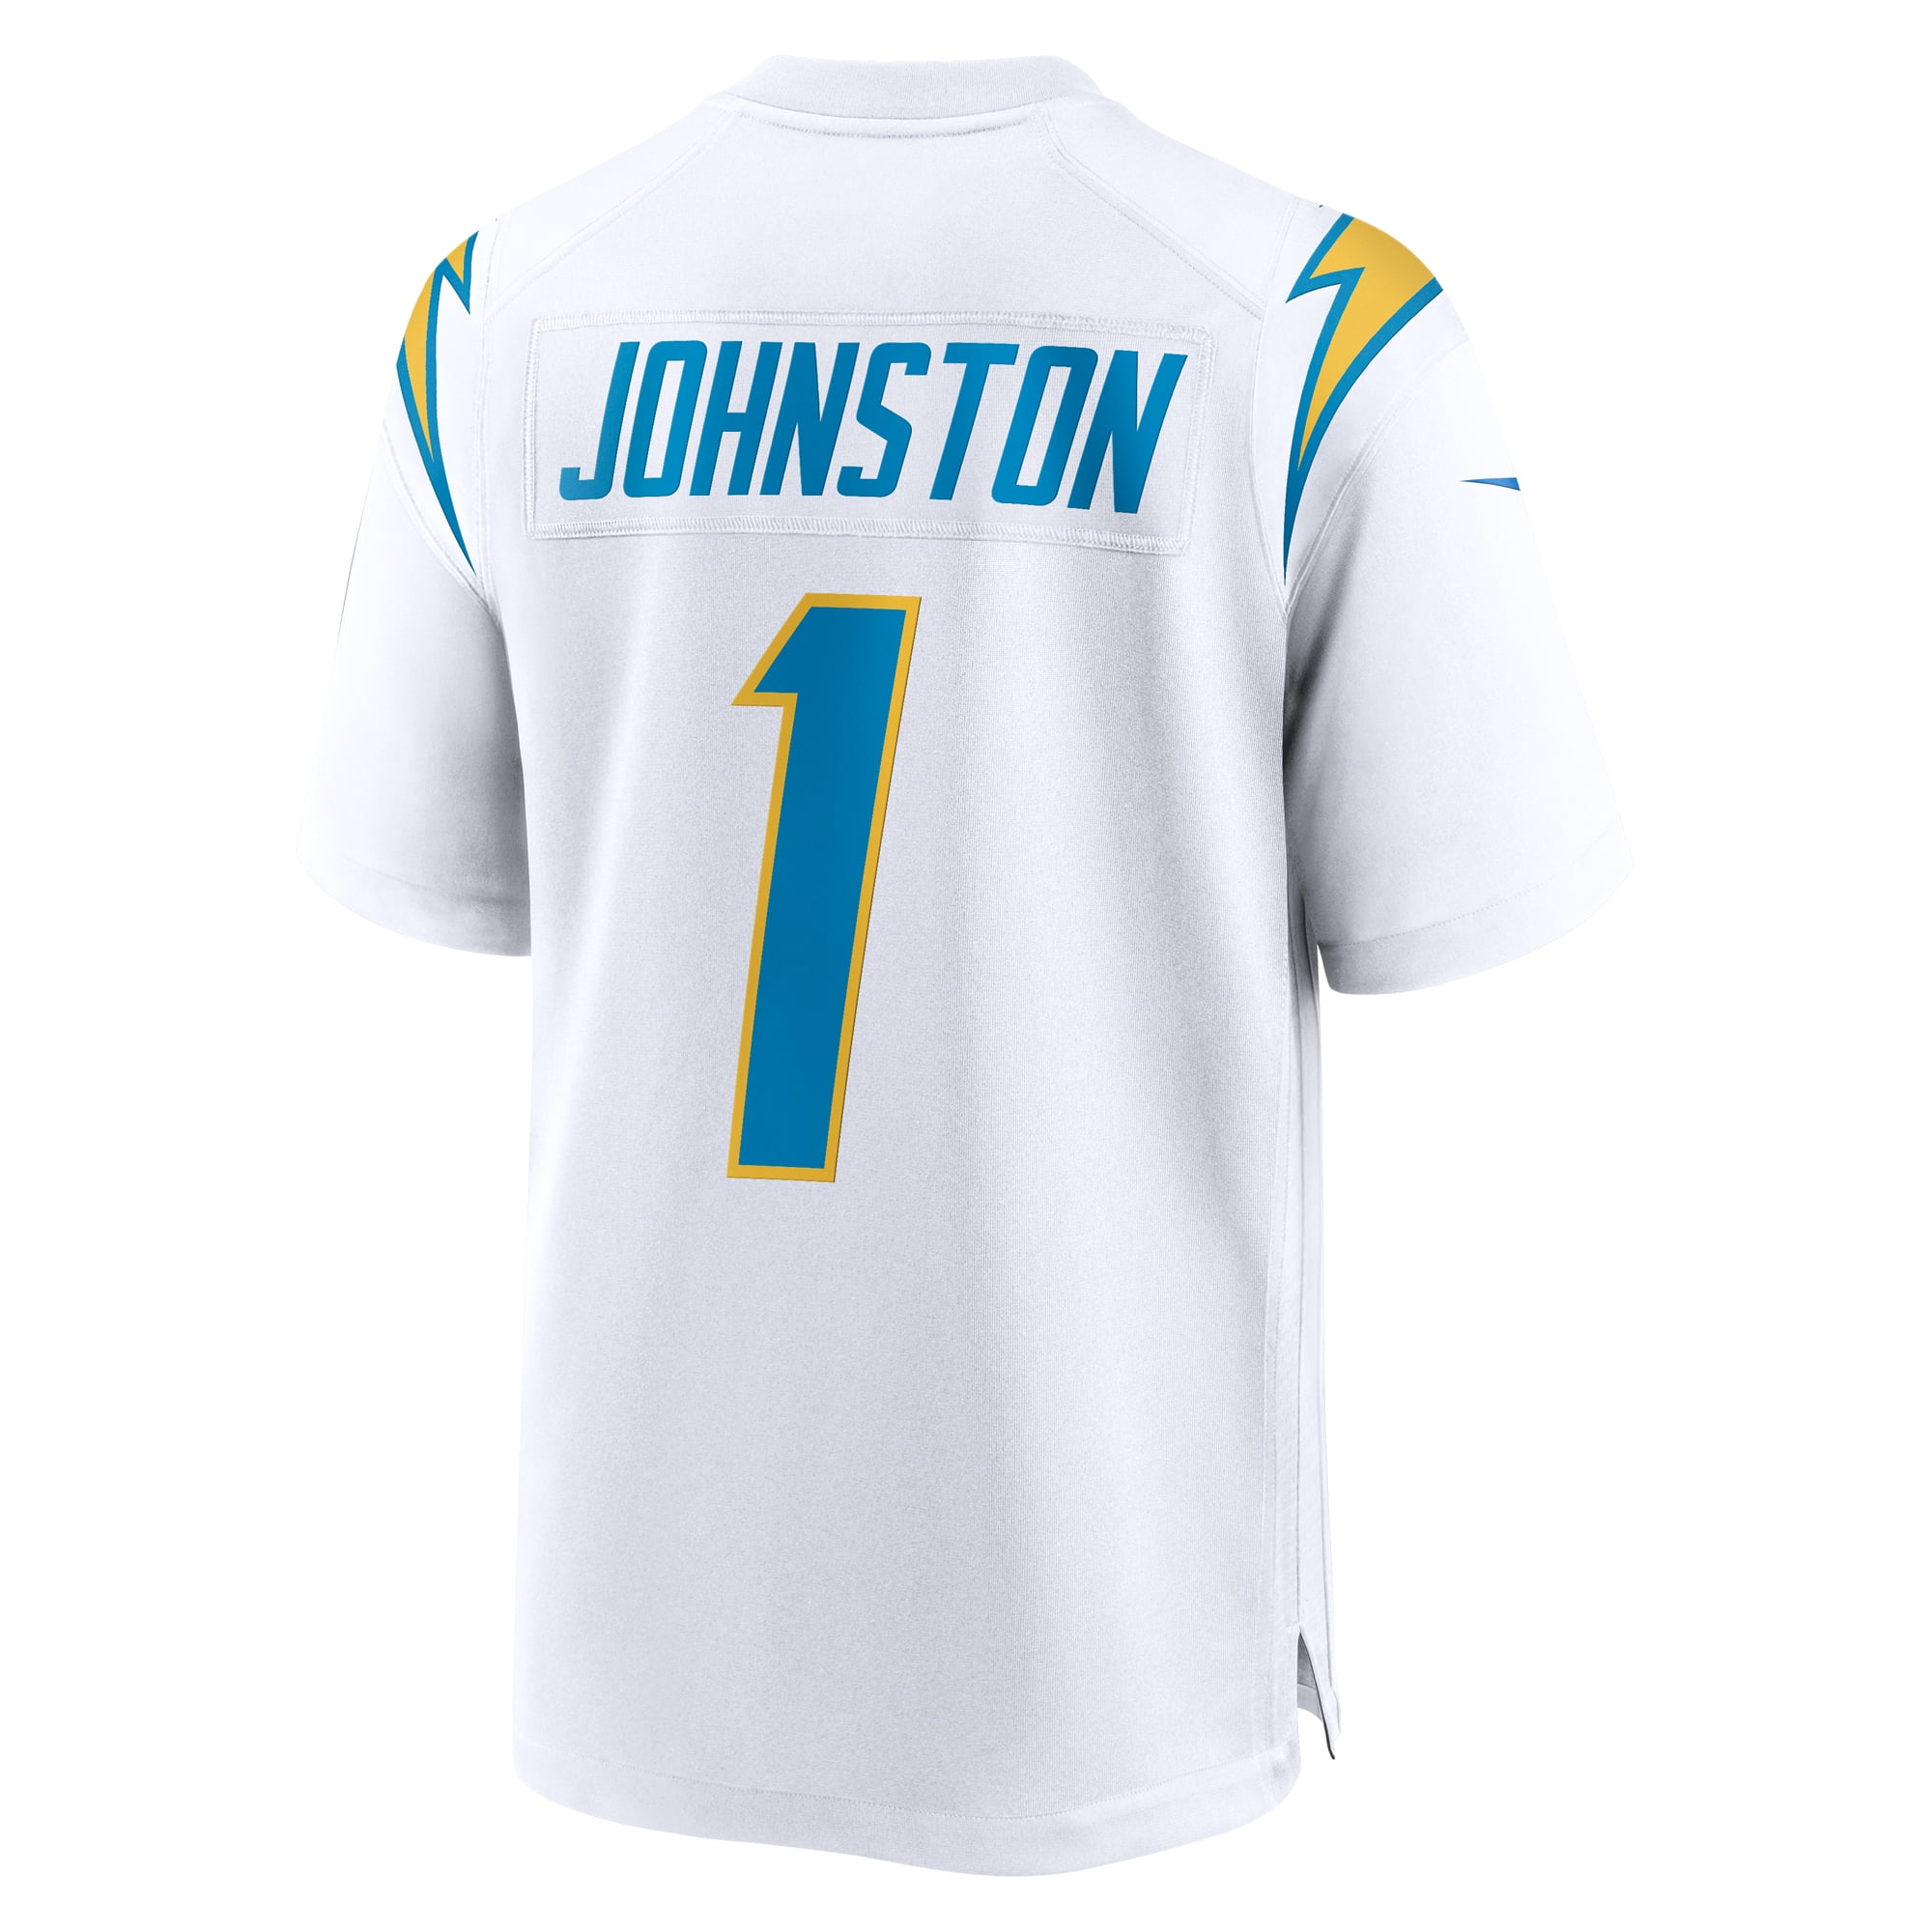 Justin Herbert Los Angeles Chargers Autographed White Nike Limited Jersey